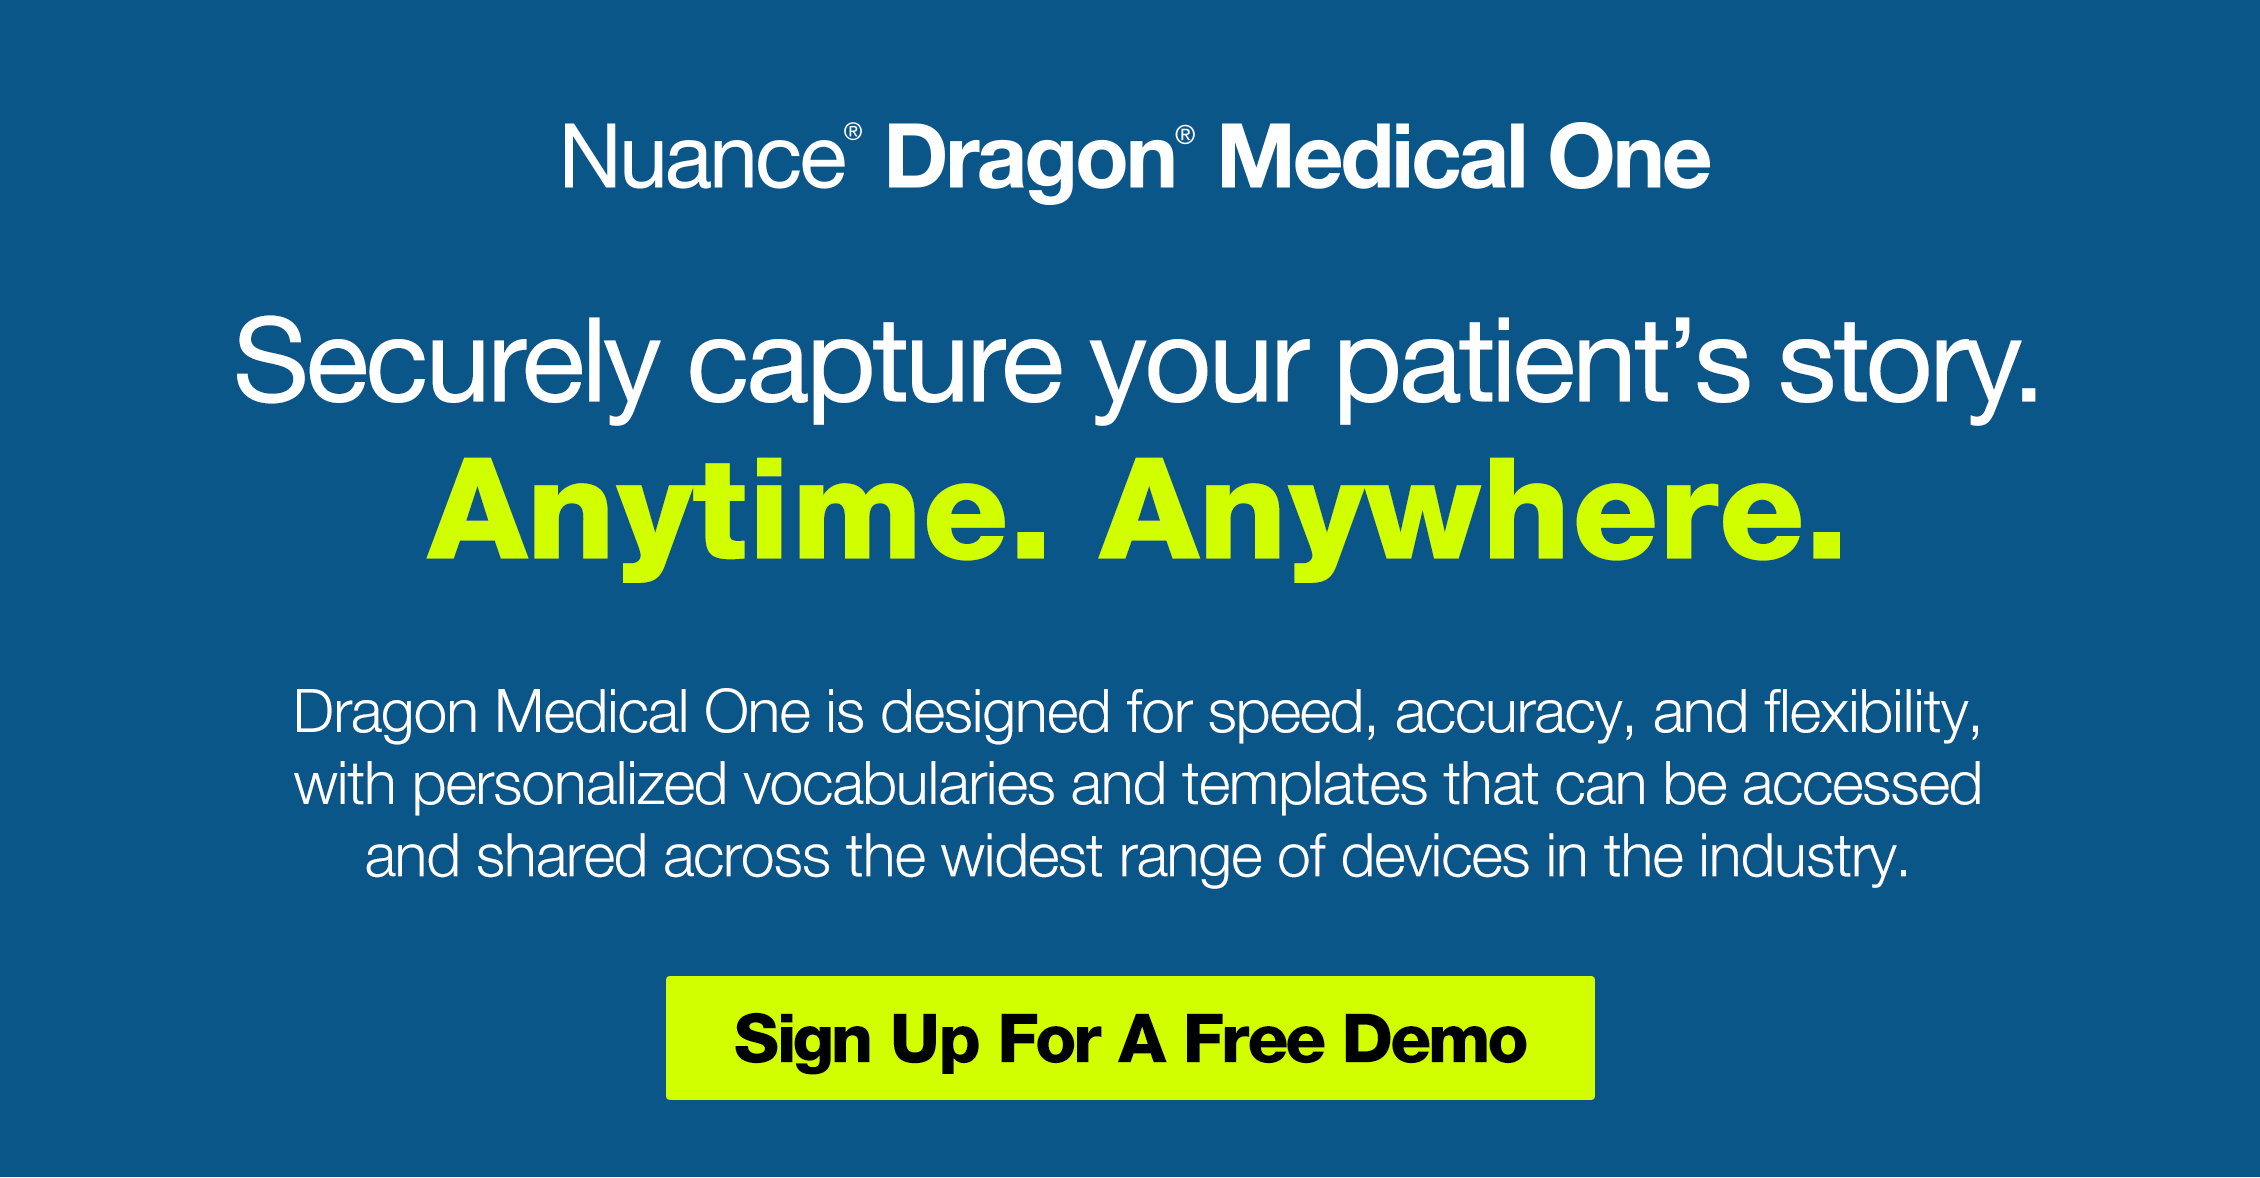 Nuance Dragon Medical One - Securely capture your patient’s story. Anytime. Anywhere. - Dragon Medical One is designed for speed, accuracy, and flexibility, with personalized vocabularies and templates that can be accessed and shared across the widest range of devices in the industry.